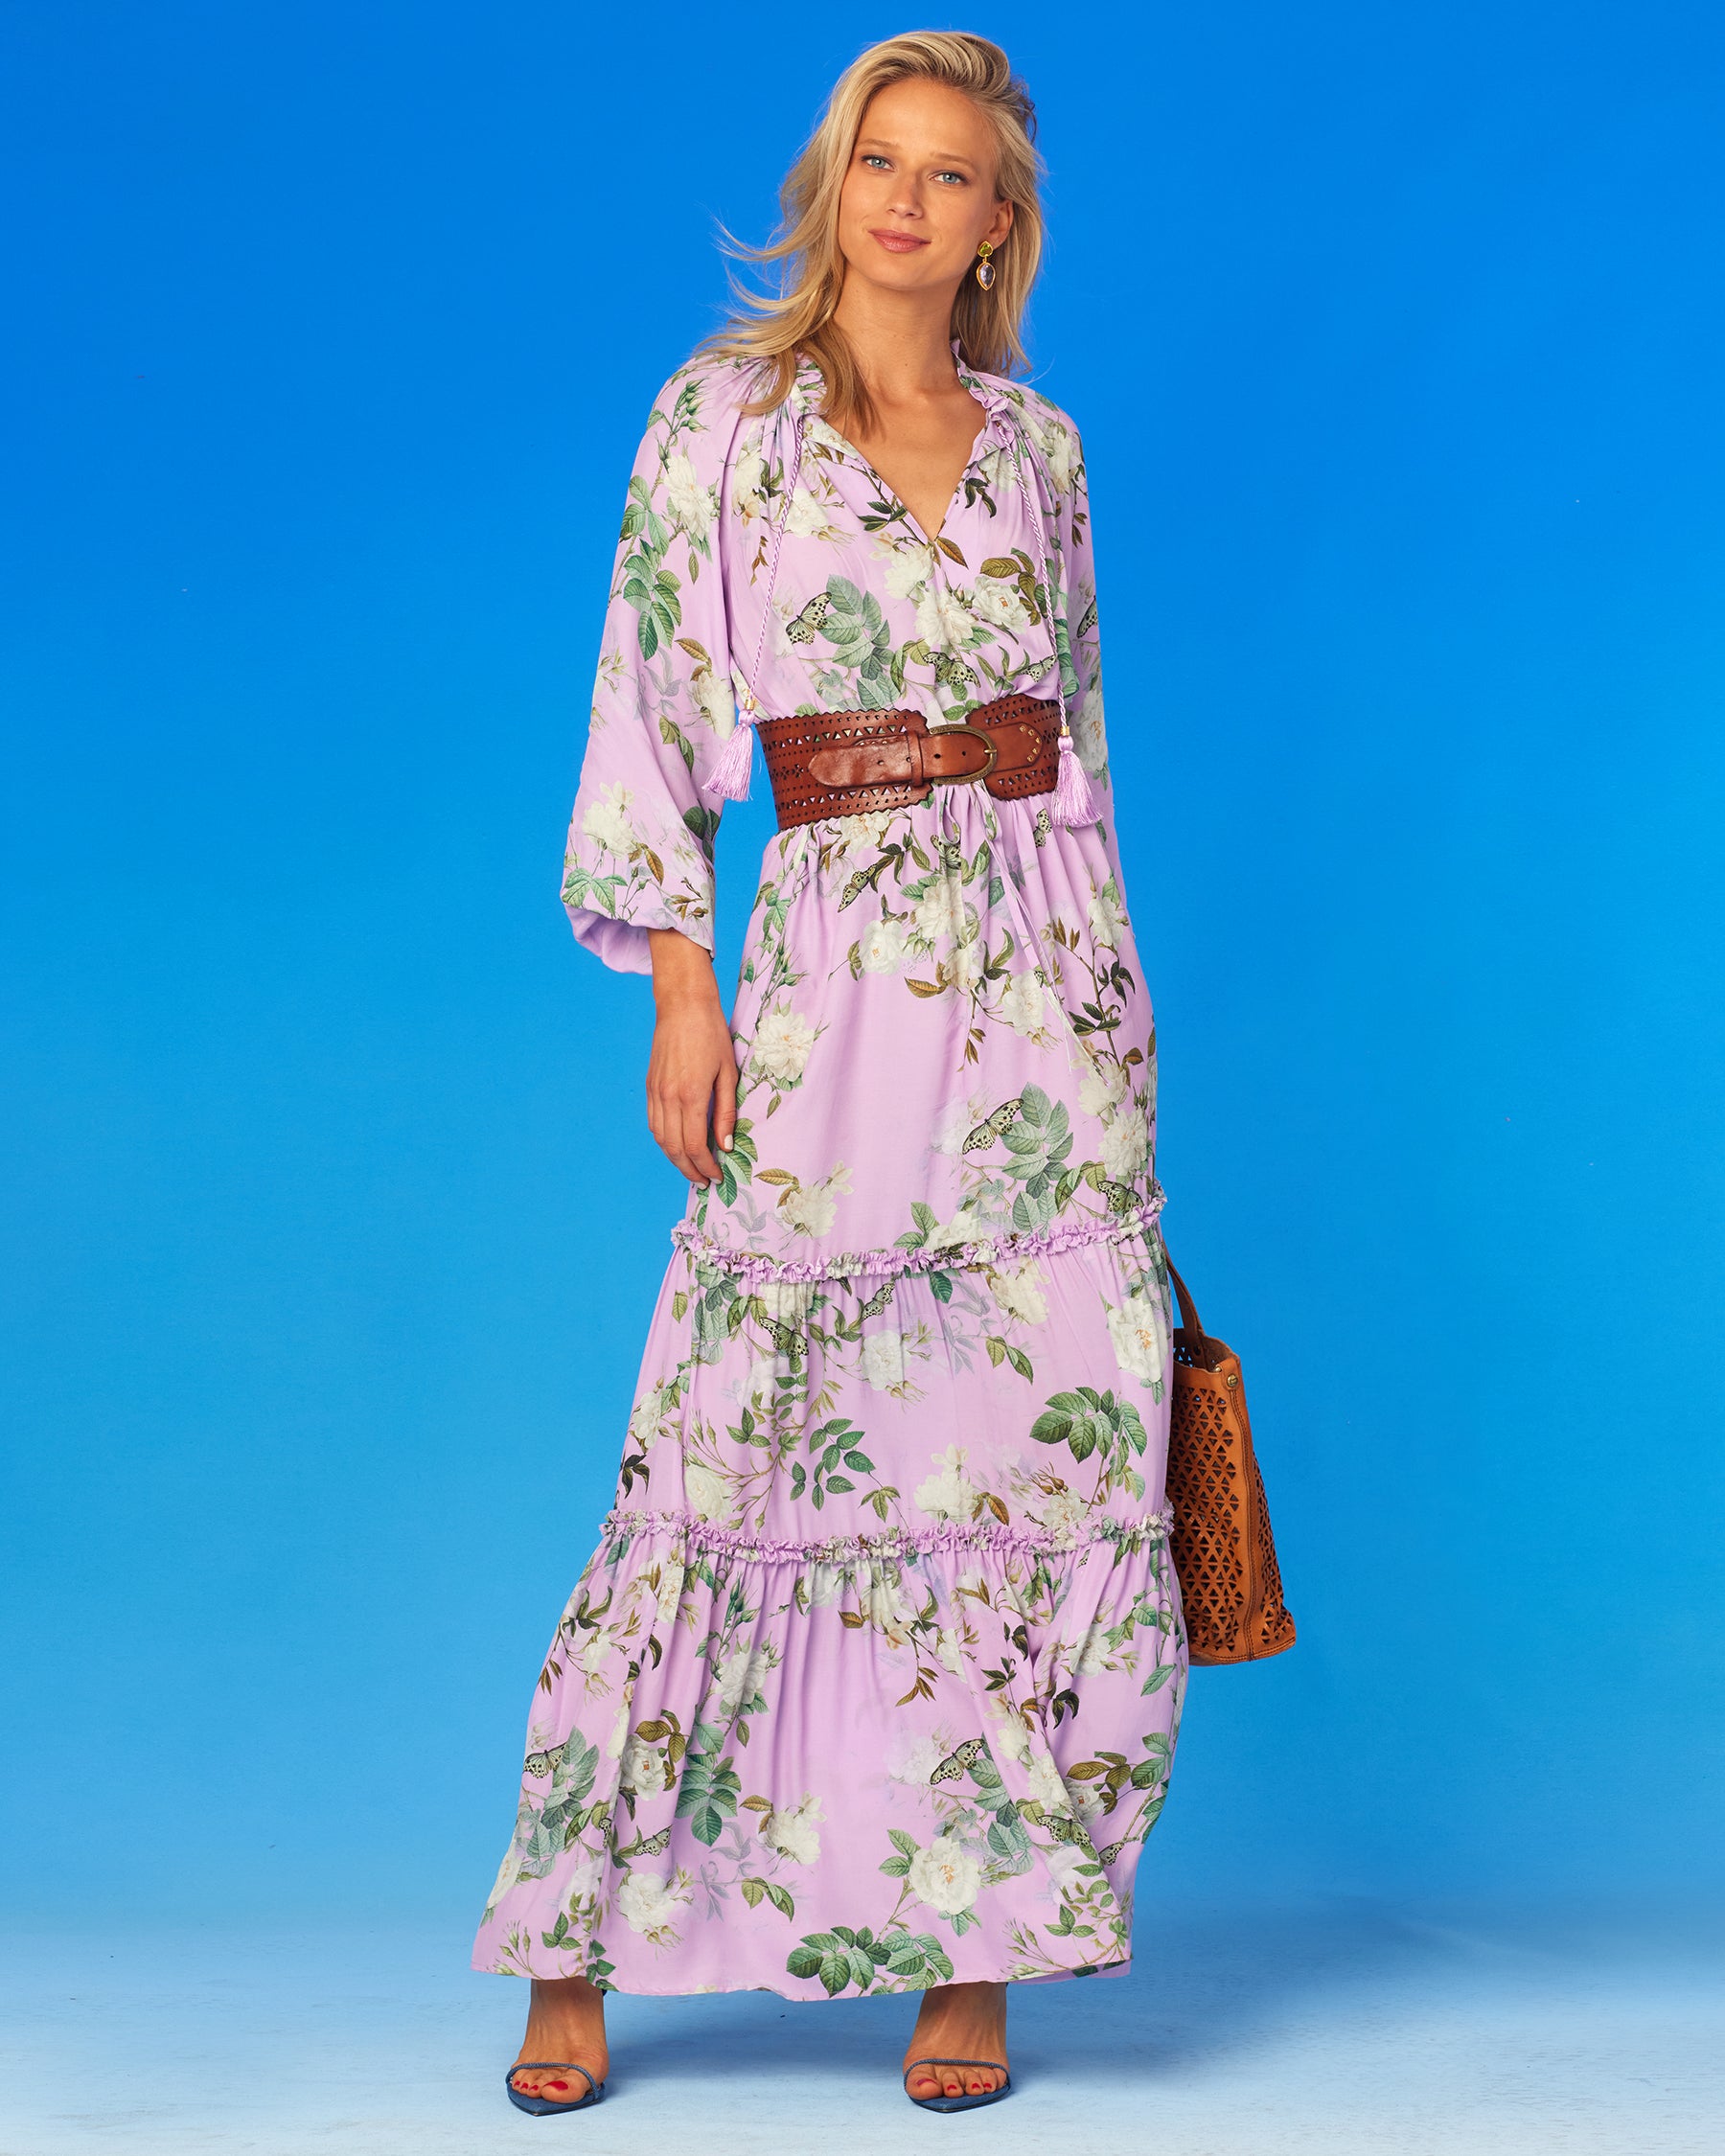 Gwendolyn Ruffle Drawstring Maxi Dress in English Garden-Full Front View with Campomaggi Belt and Tote